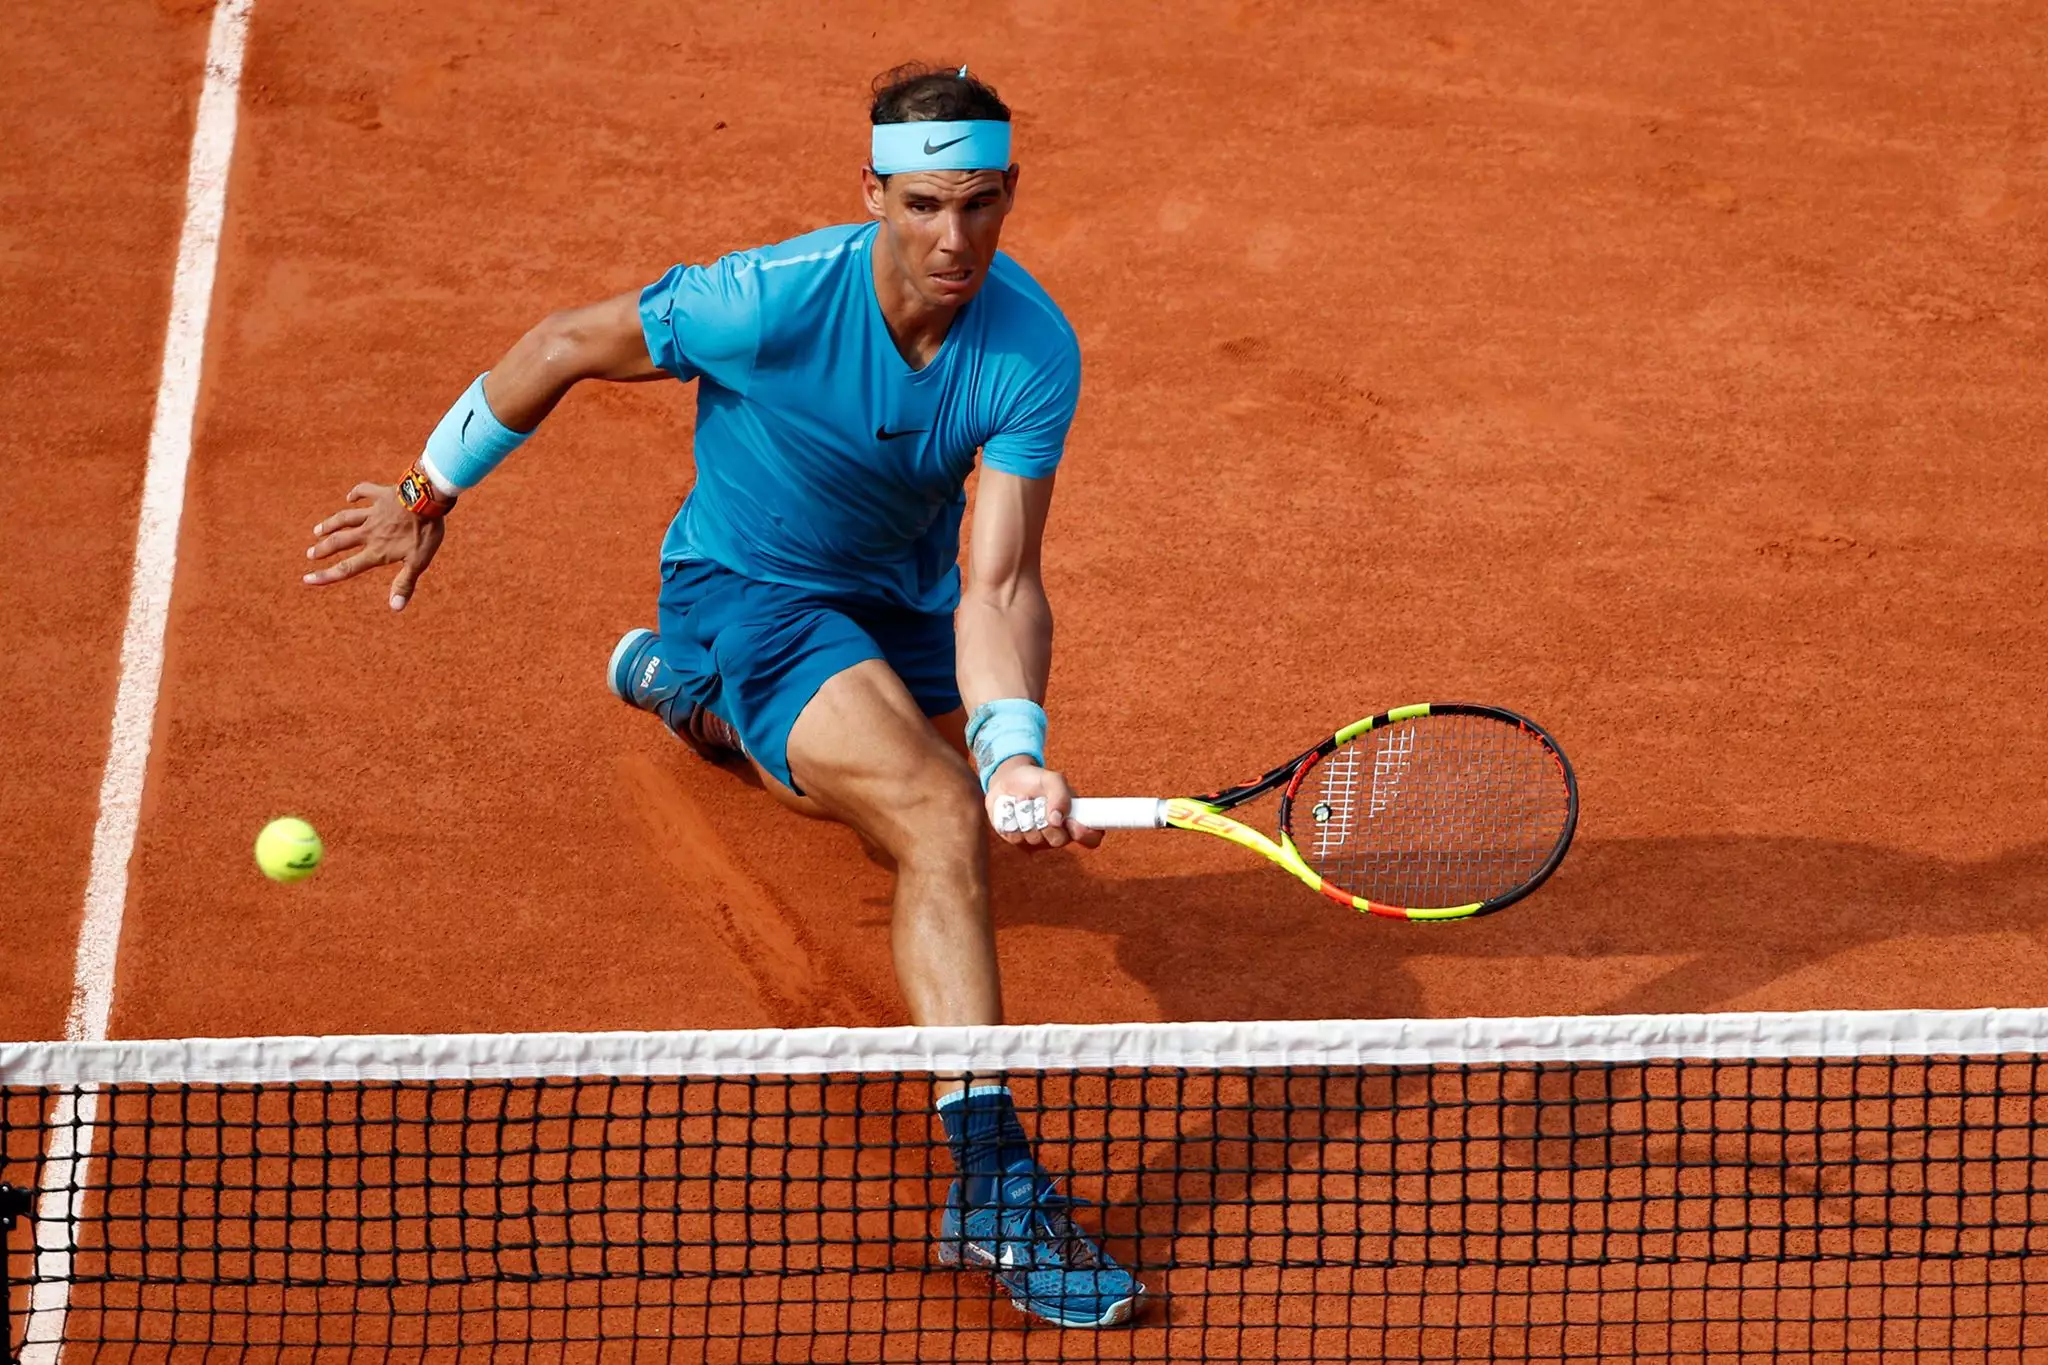 Nadal slides across the clay. Image: PA